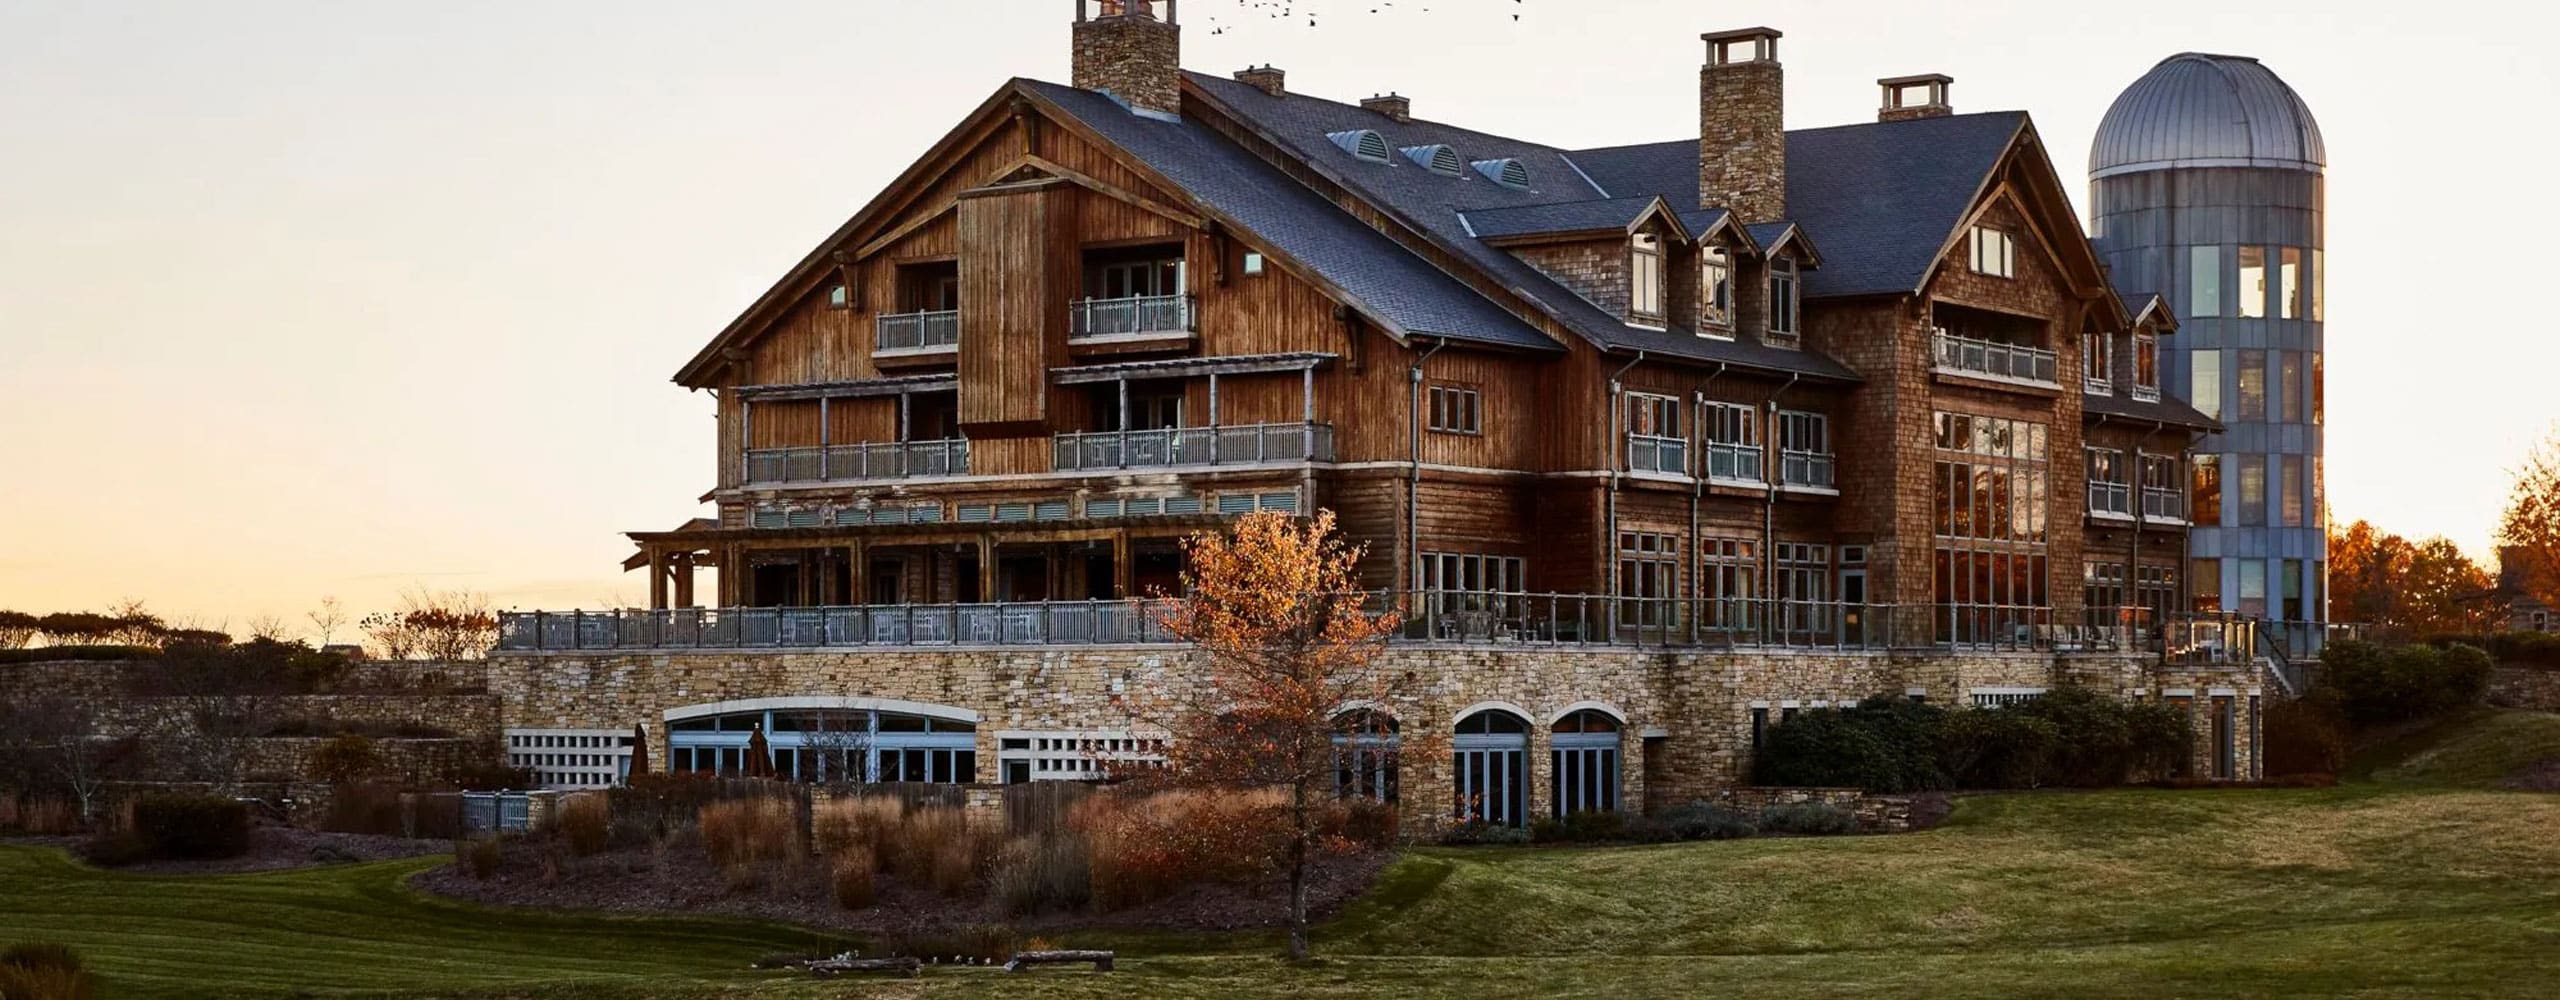 Primland Resort Commercial, Hospitality Architecture